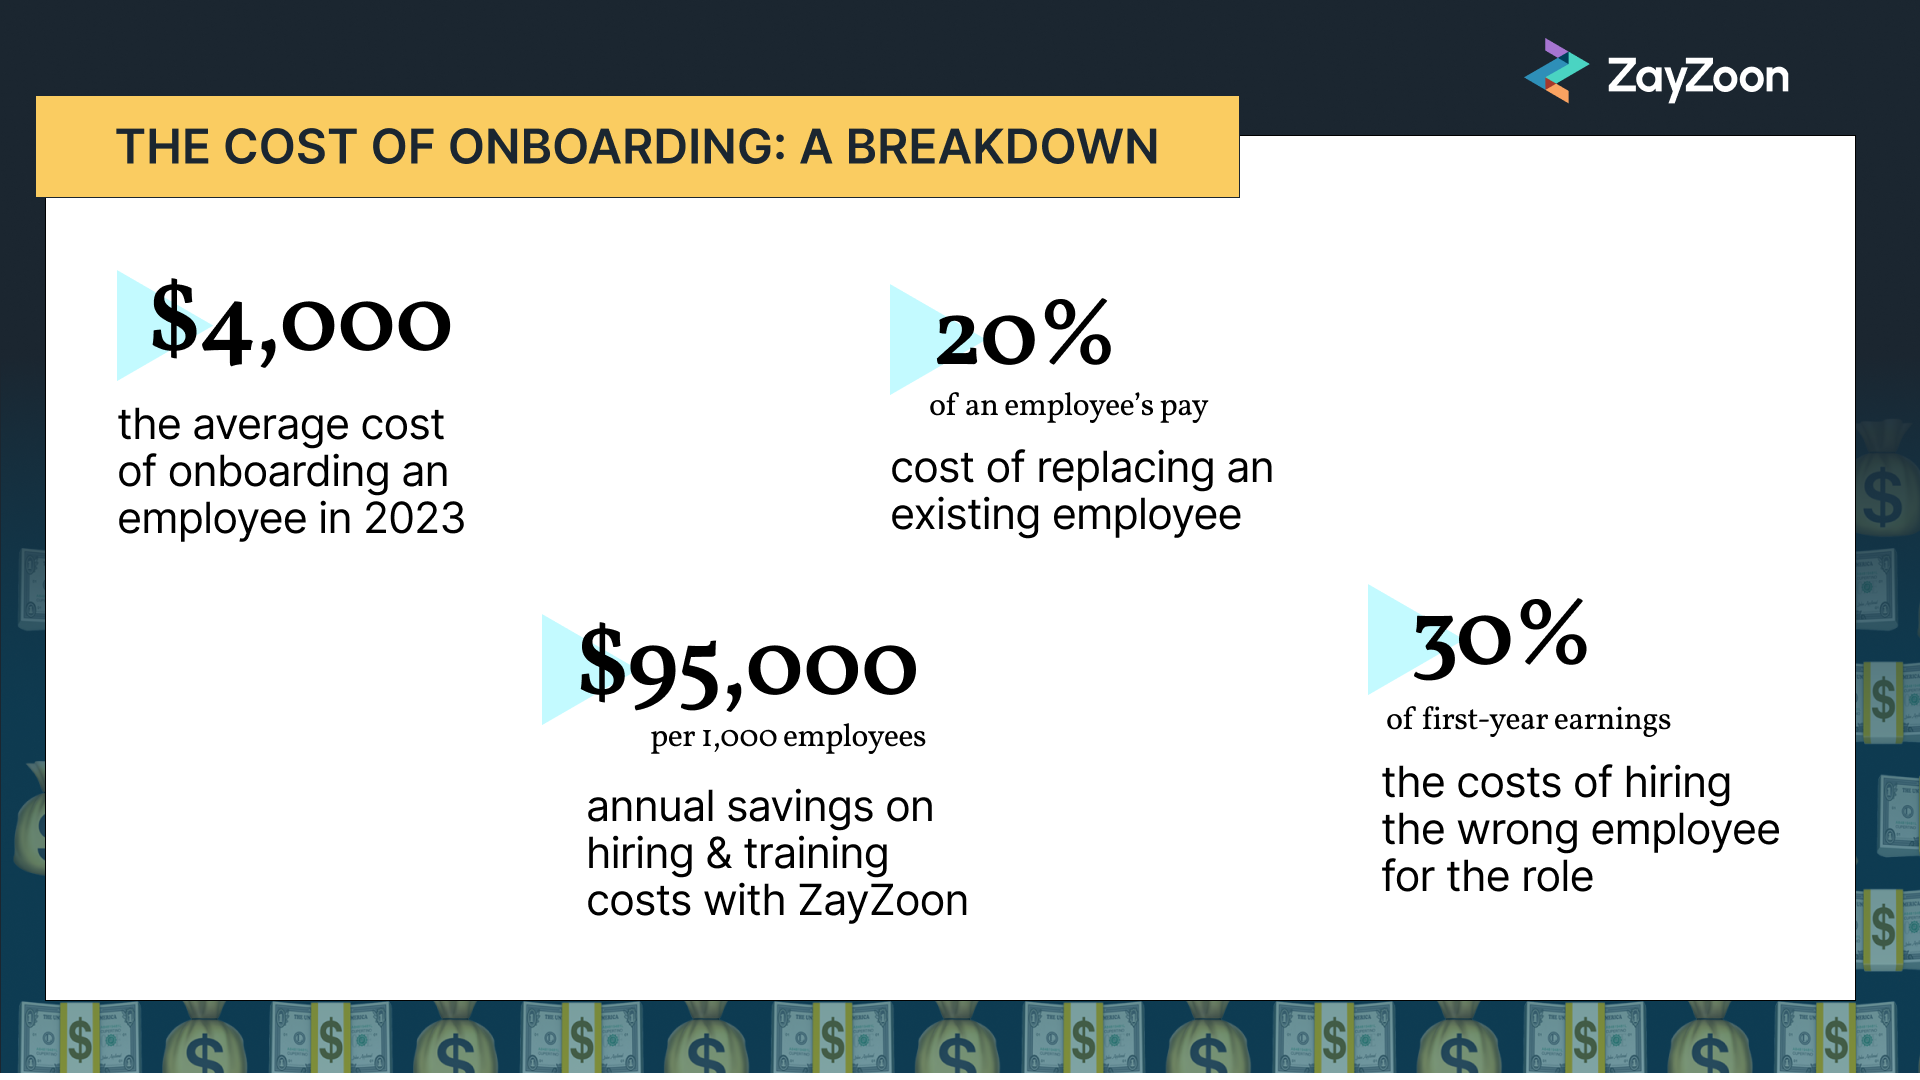 The cost of onboarding